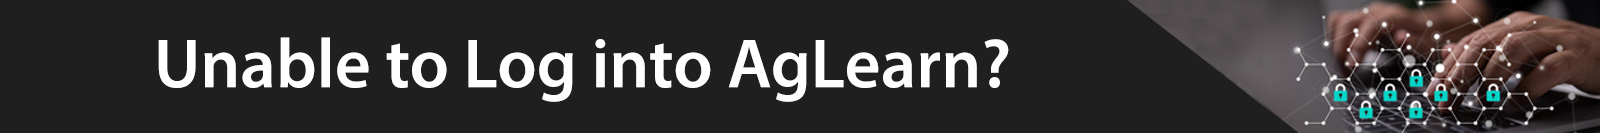 Unable to Log into AgLearn?